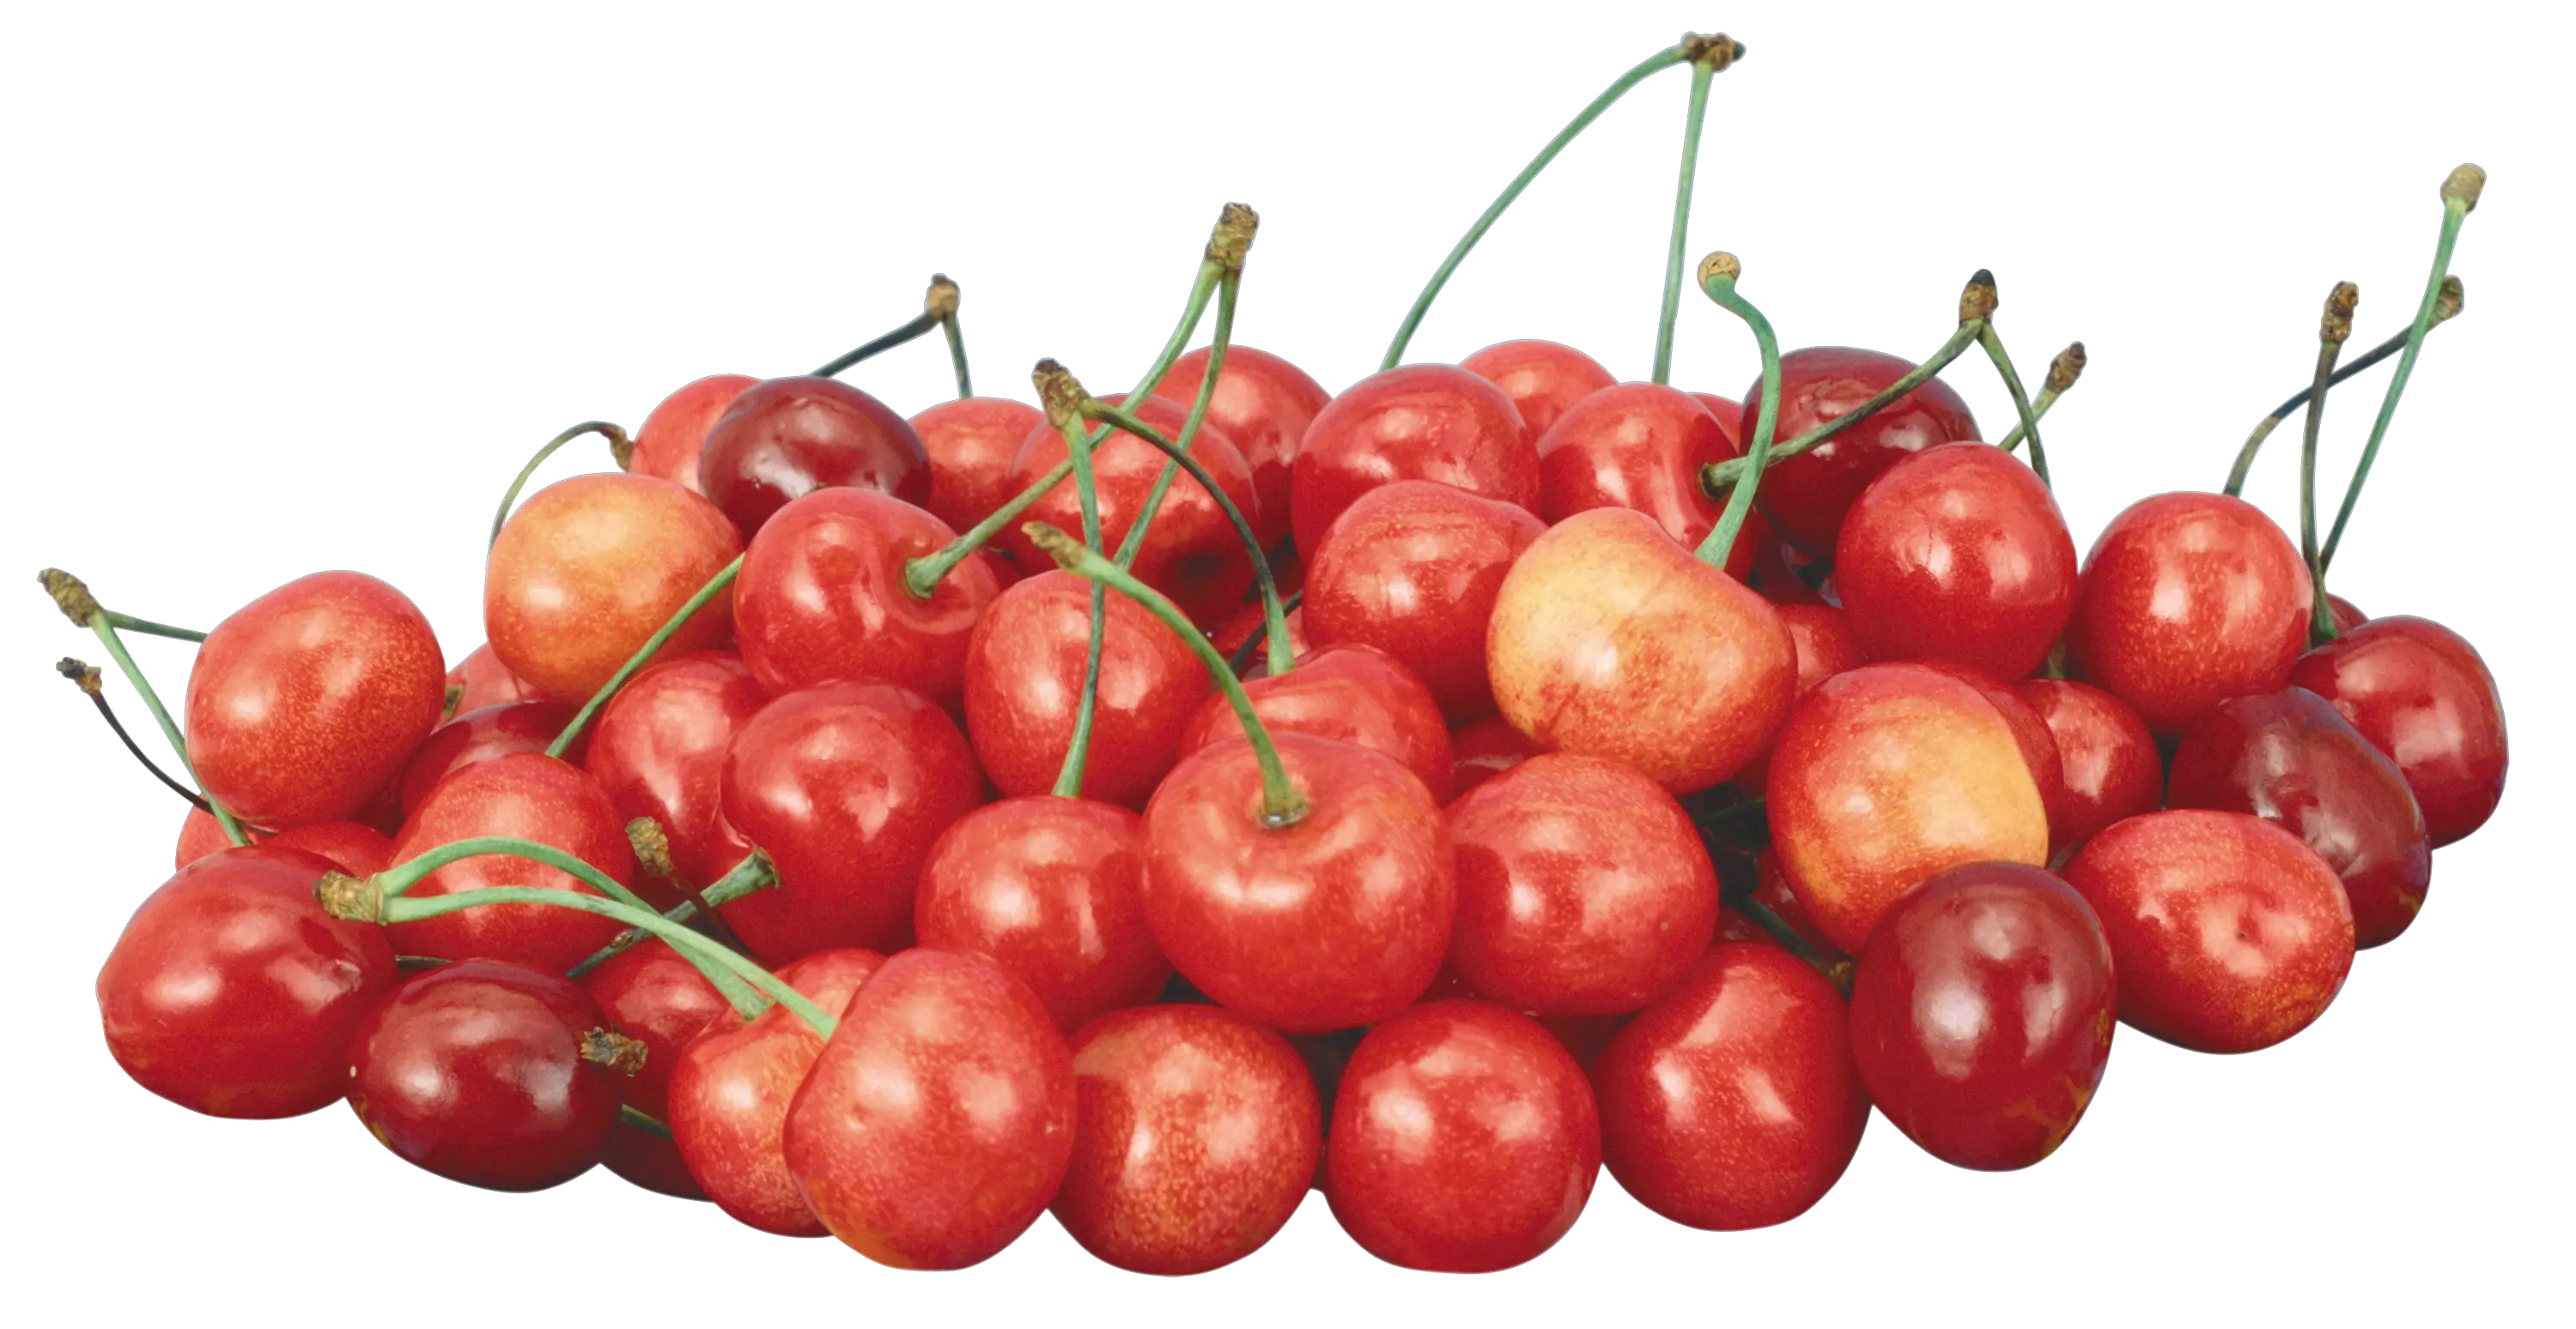 Cherries Png Cherries Acerola Cherries Png 153257 Cherries Png